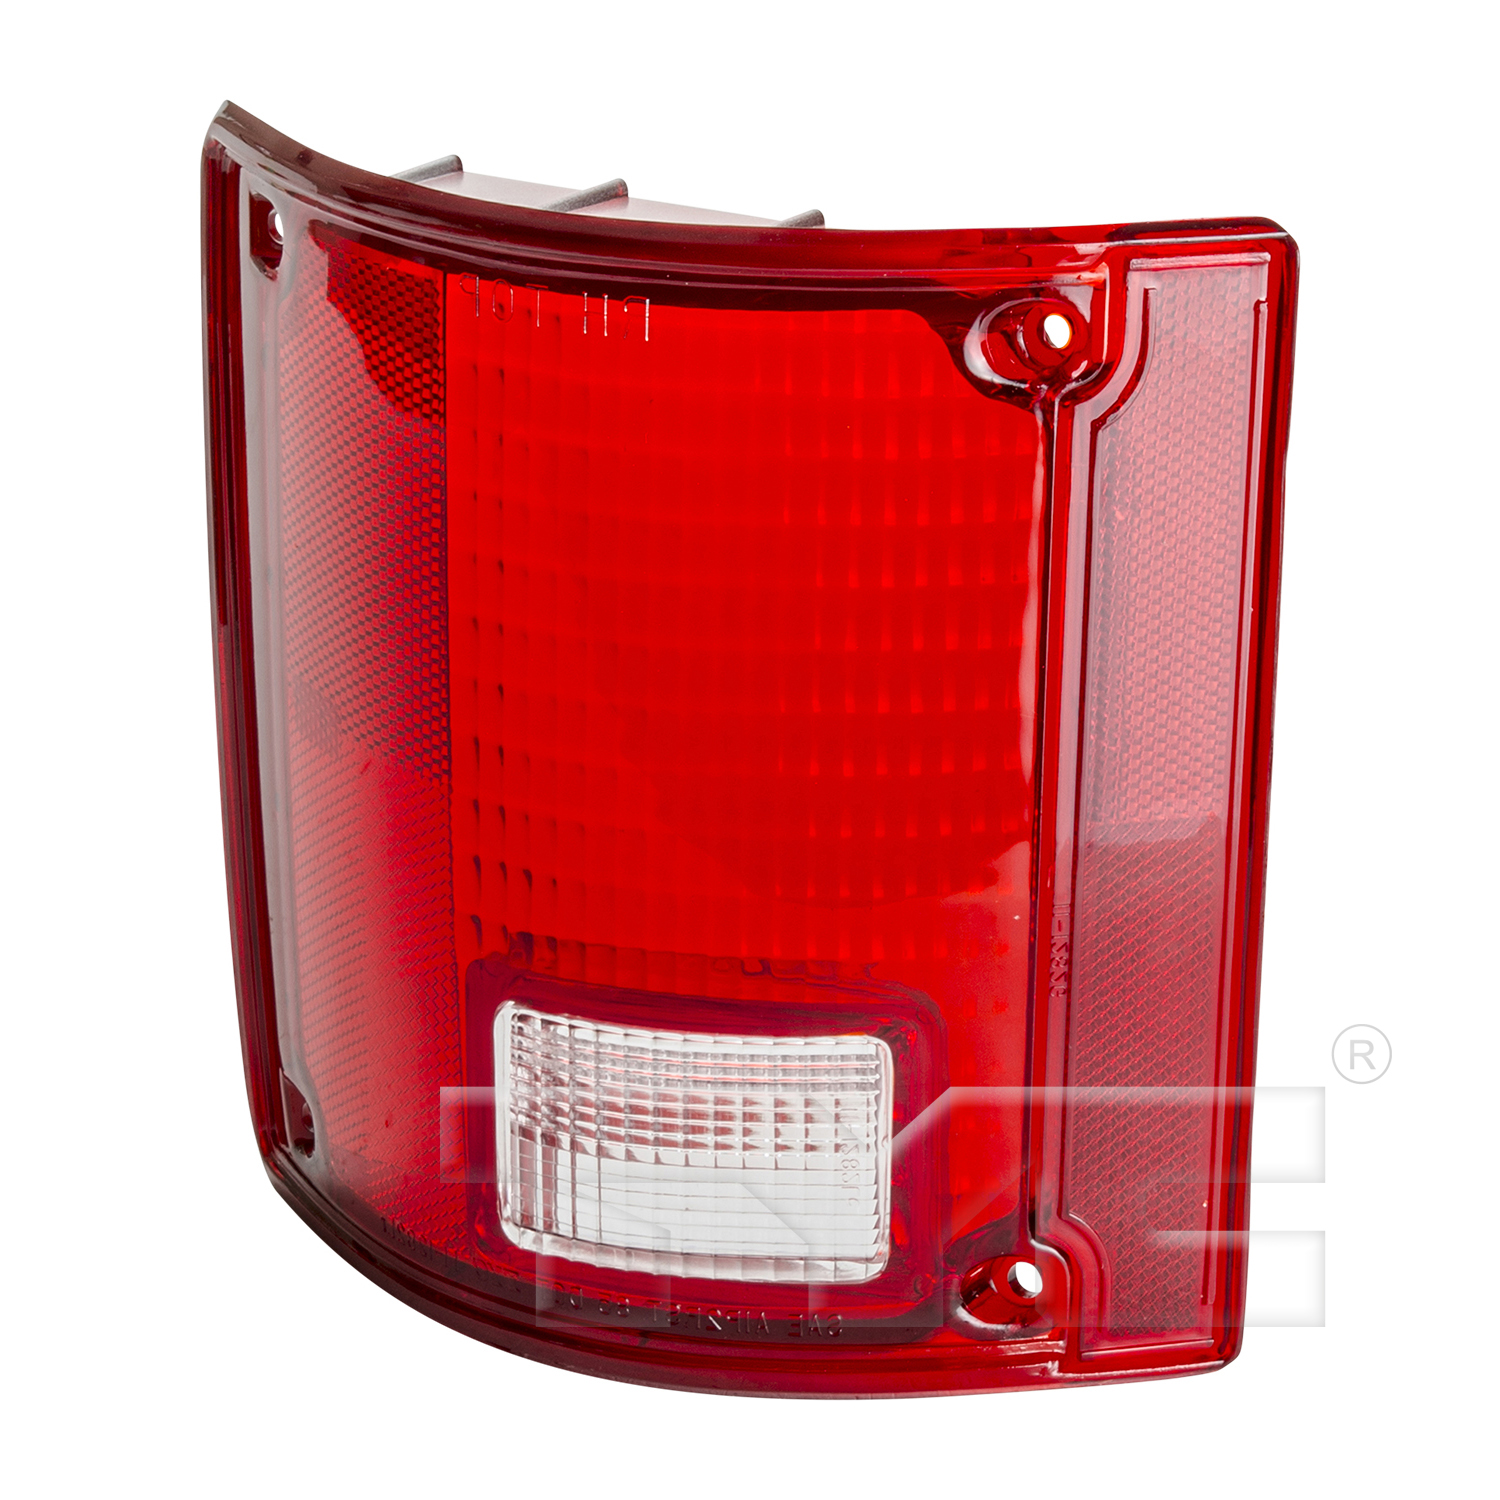 Aftermarket TAILLIGHTS for CHEVROLET - R1500 SUBURBAN, R1500 SUBURBAN,89-91,LT Taillamp lens